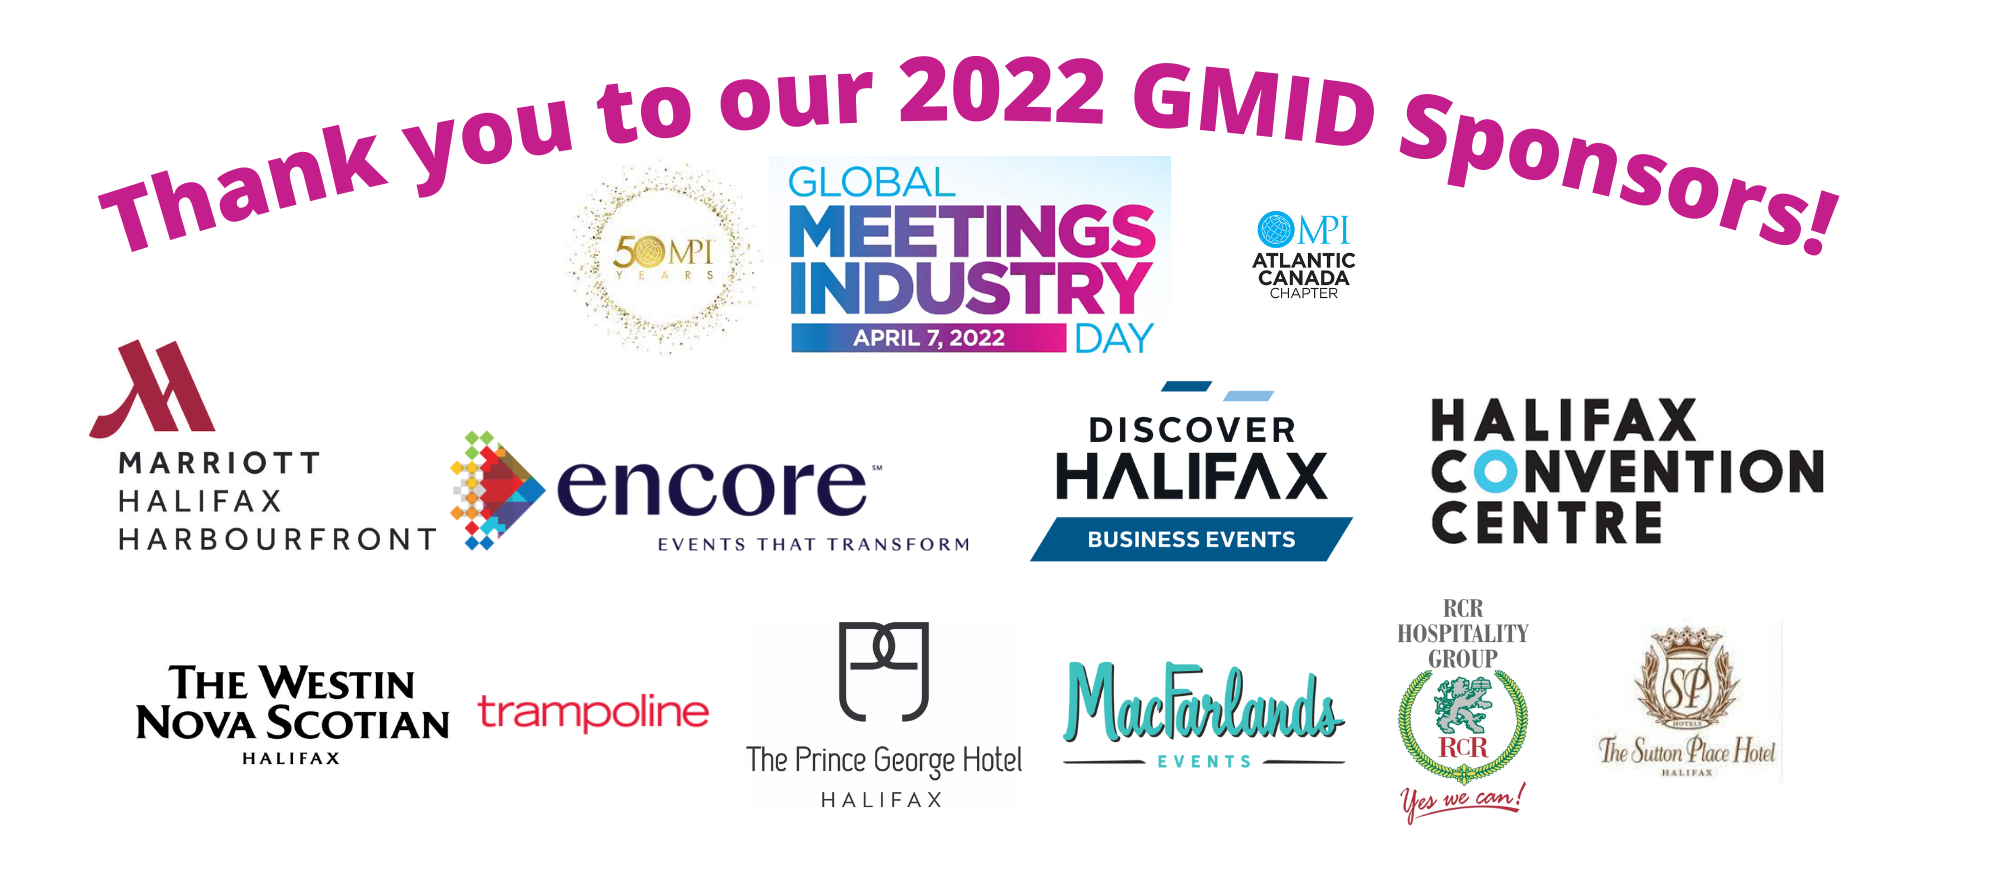 Thank you to our 2022 GMID Sponsors! (1)